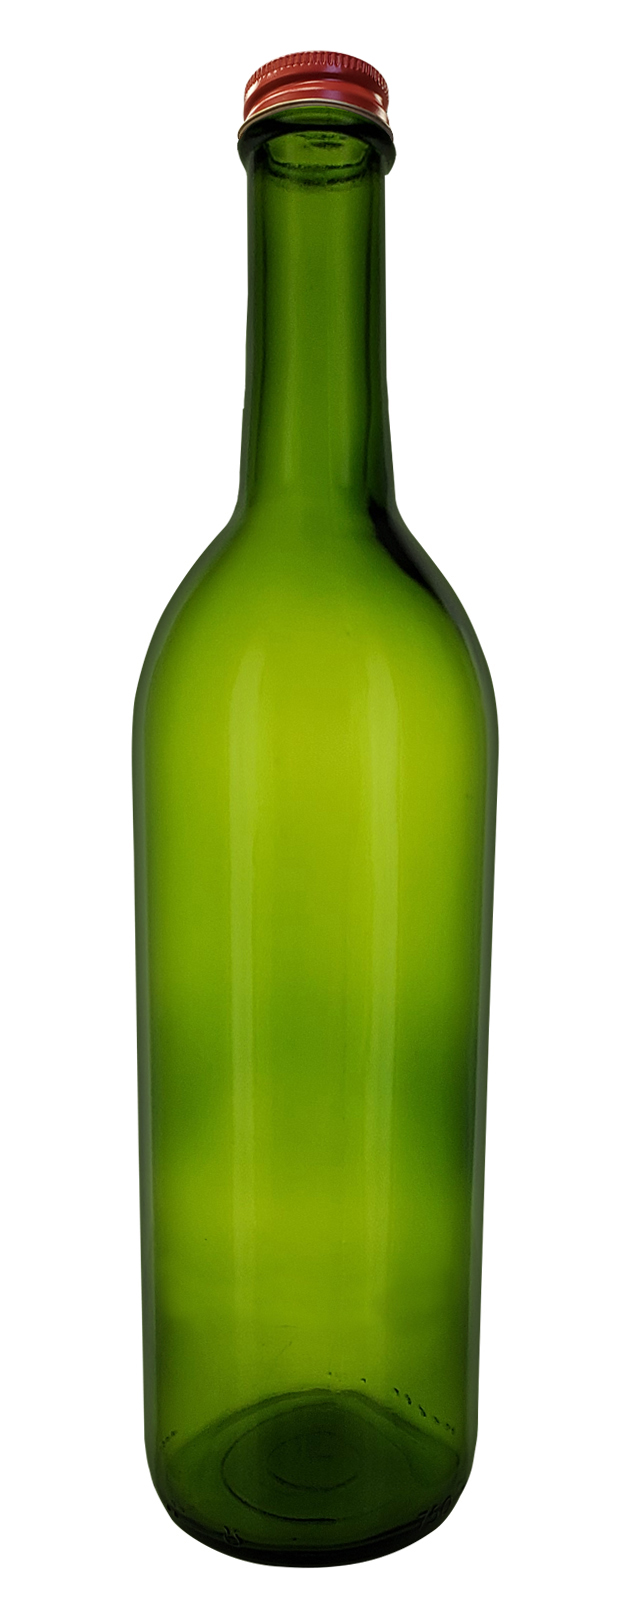 HOME BREW OHIO HOMEBREWOHIO.COM 750 ml Green Bordeaux Bottles, Screw Top, Case of 12 With 28mm Red Metal Lids